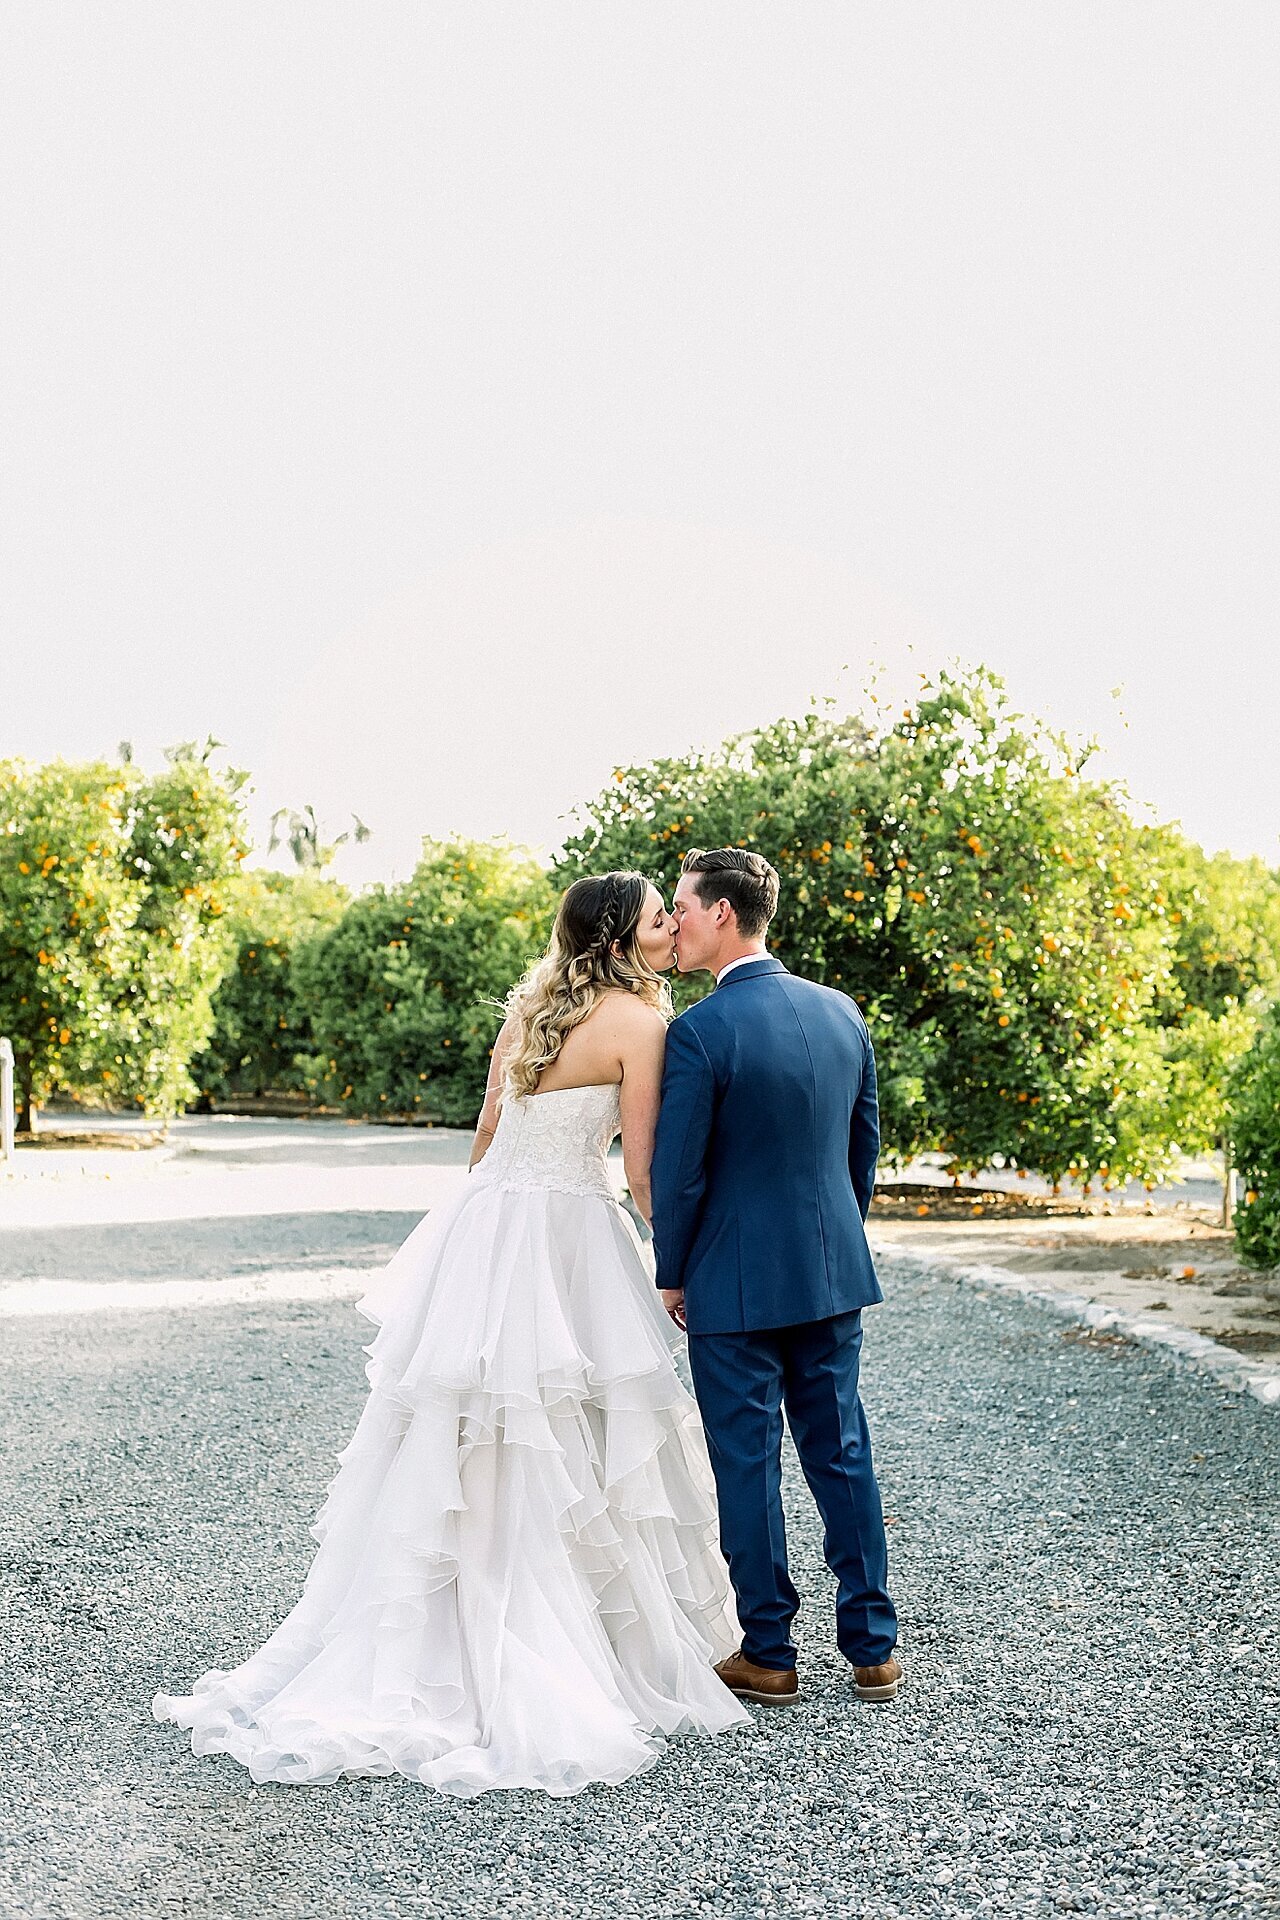 MIchelle Peterson Photography Redlands California wedding and portrait photographer_1115